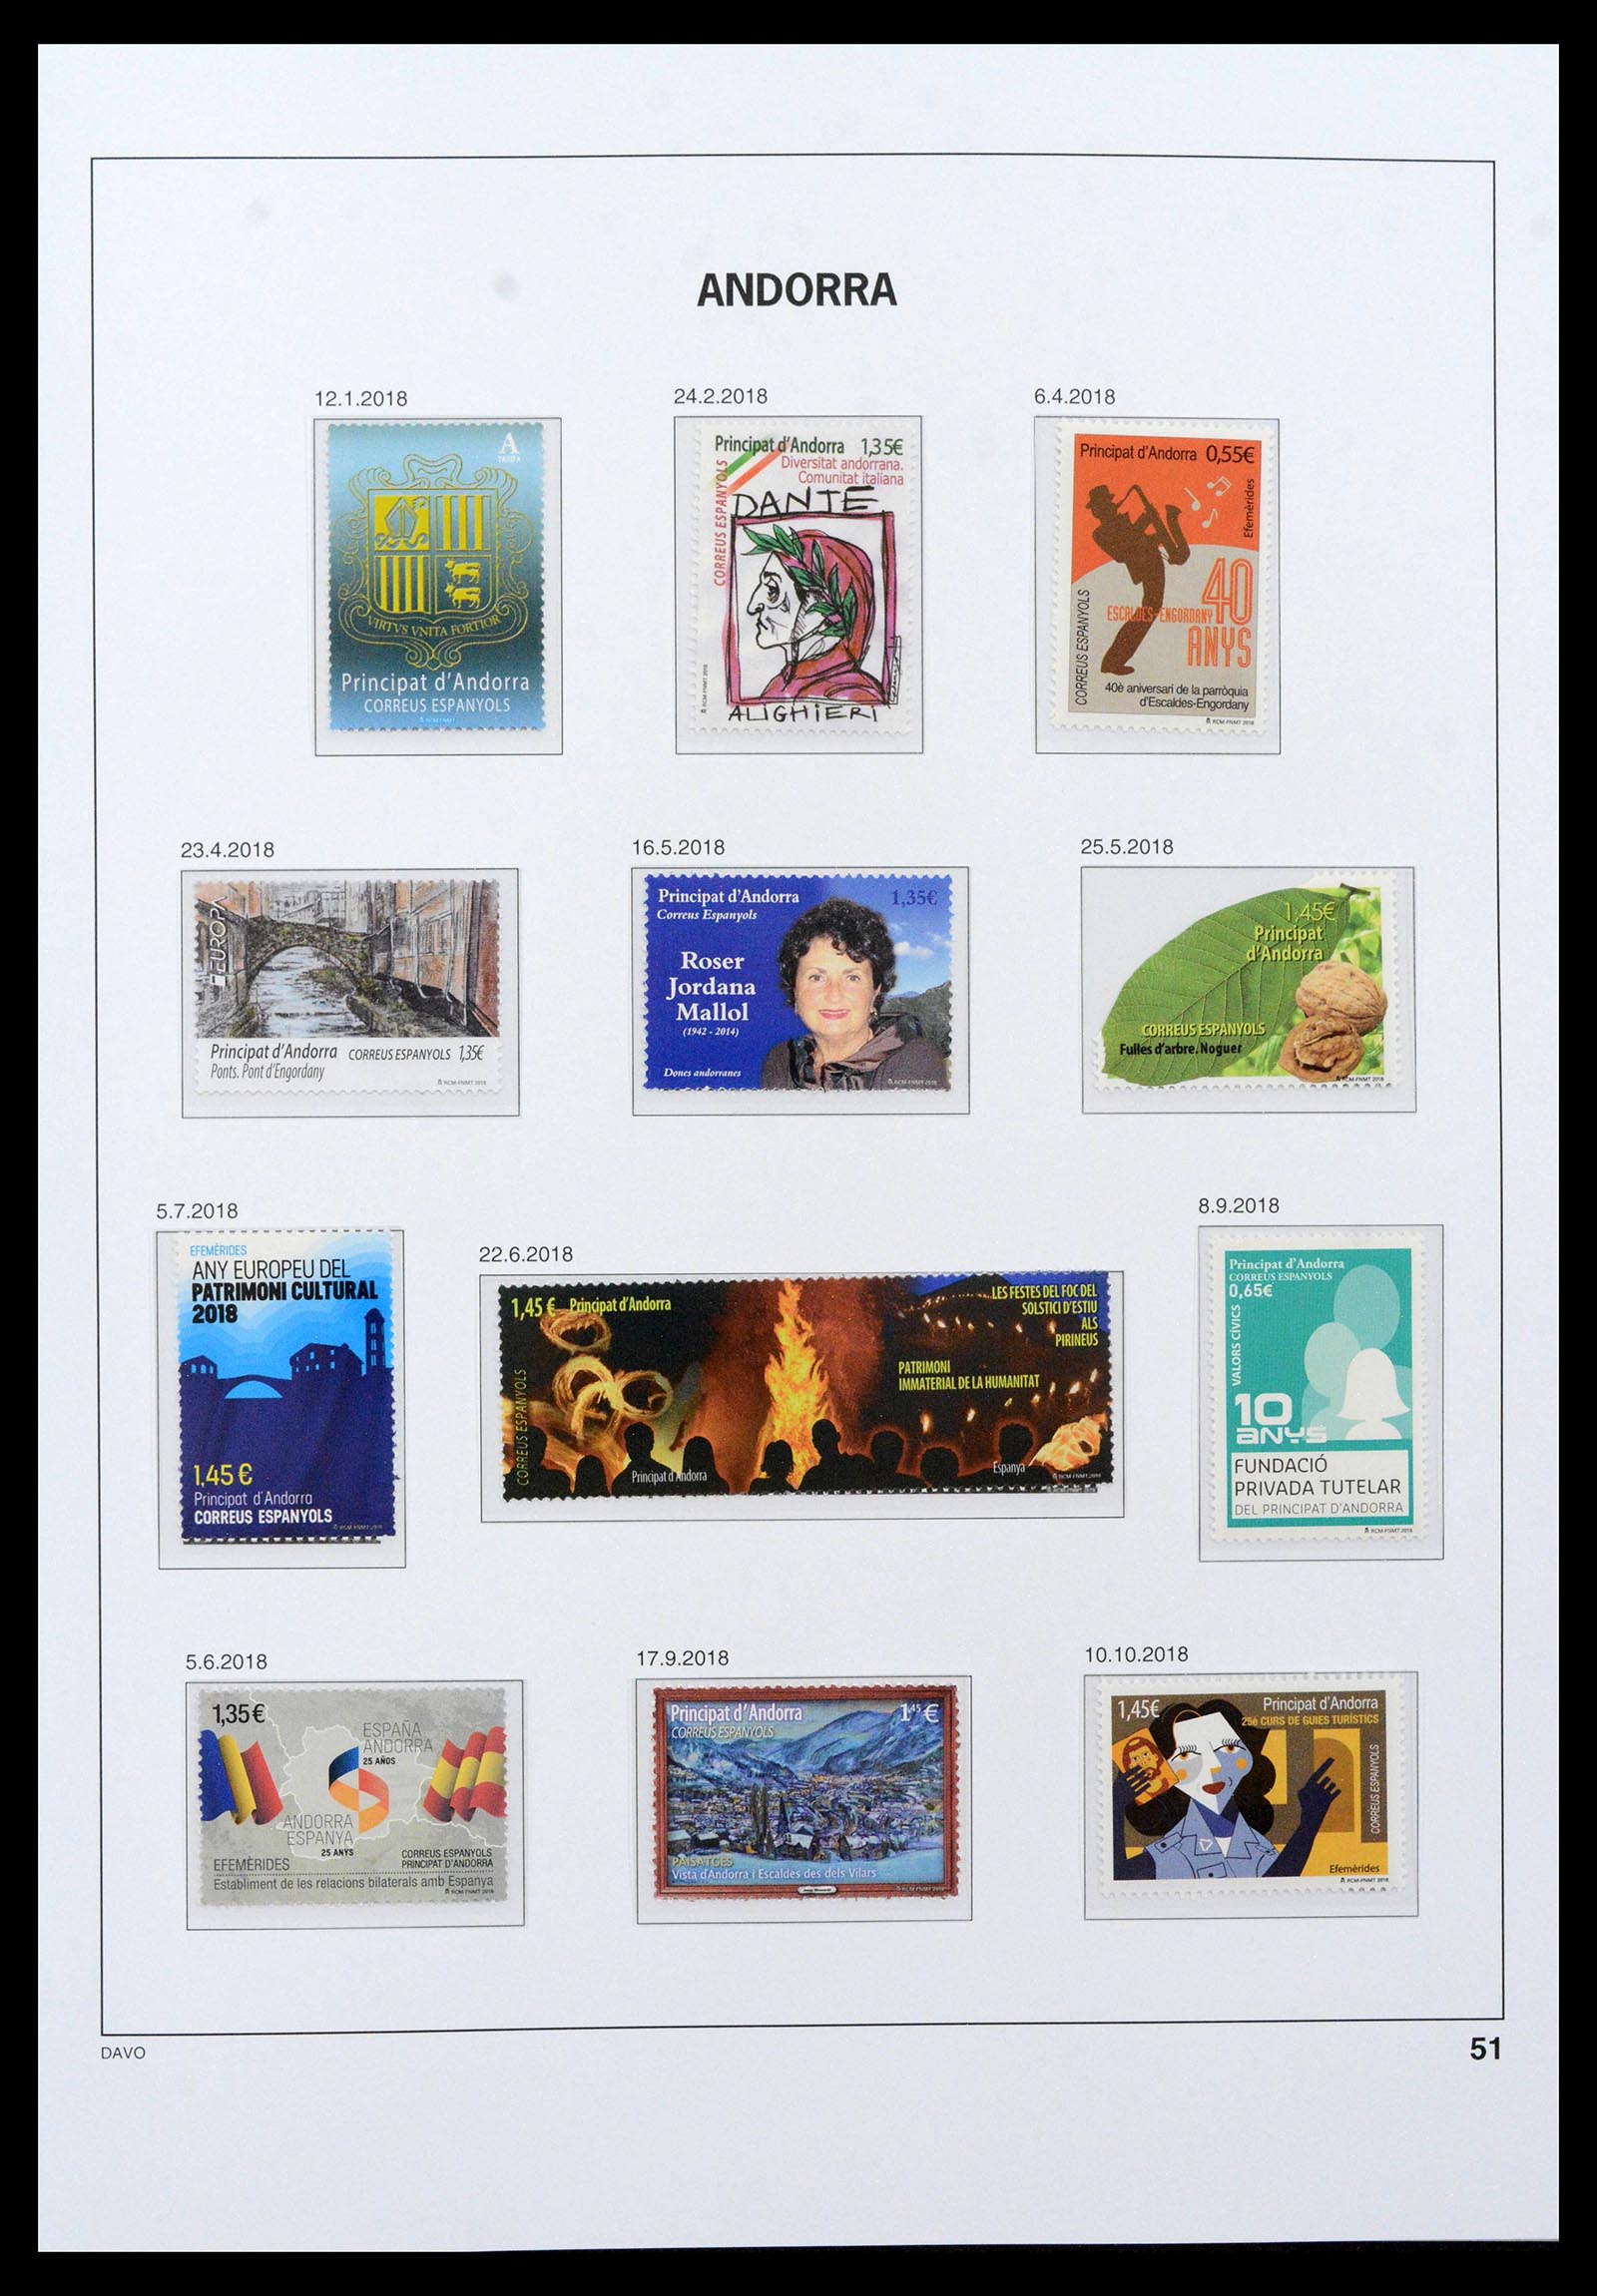 39388 0046 - Stamp collection 39388 Spanish Andorra 1928-2019!